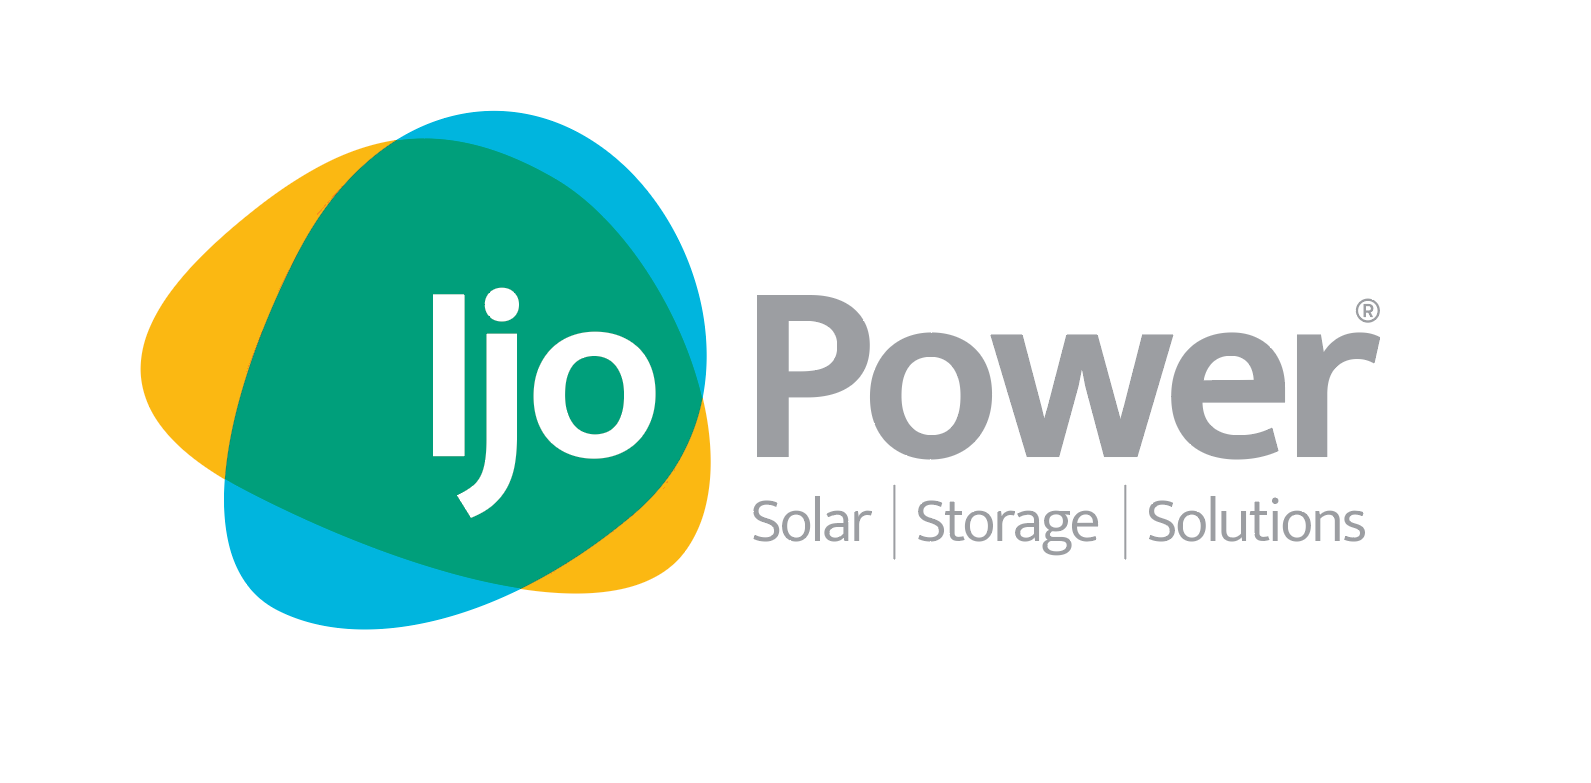 Logo of iJo Power Solar Energy Equipment - Suppliers And Installers In Truro, Cornwall